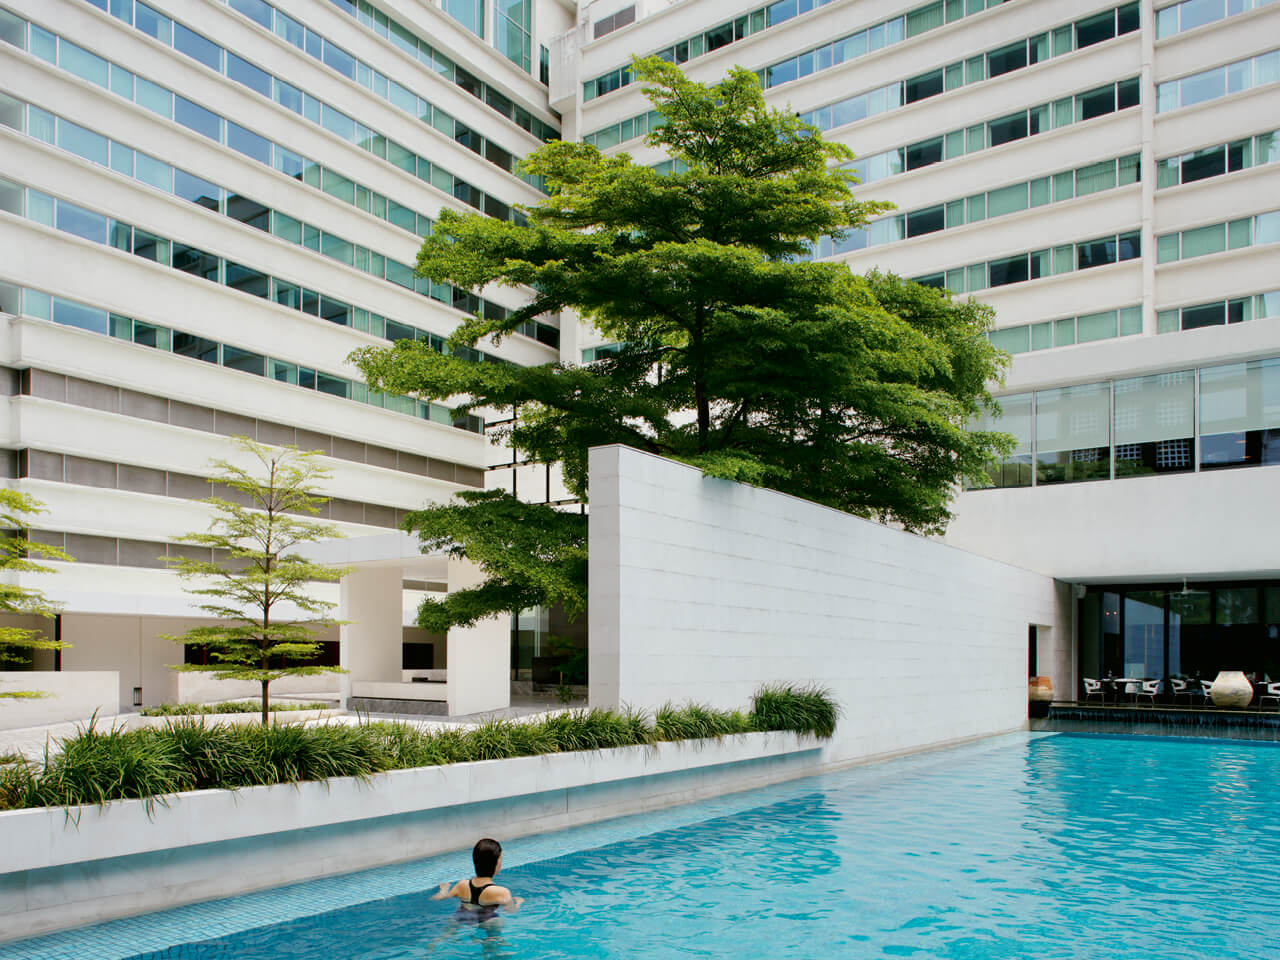 A Person In A Pool By A Building